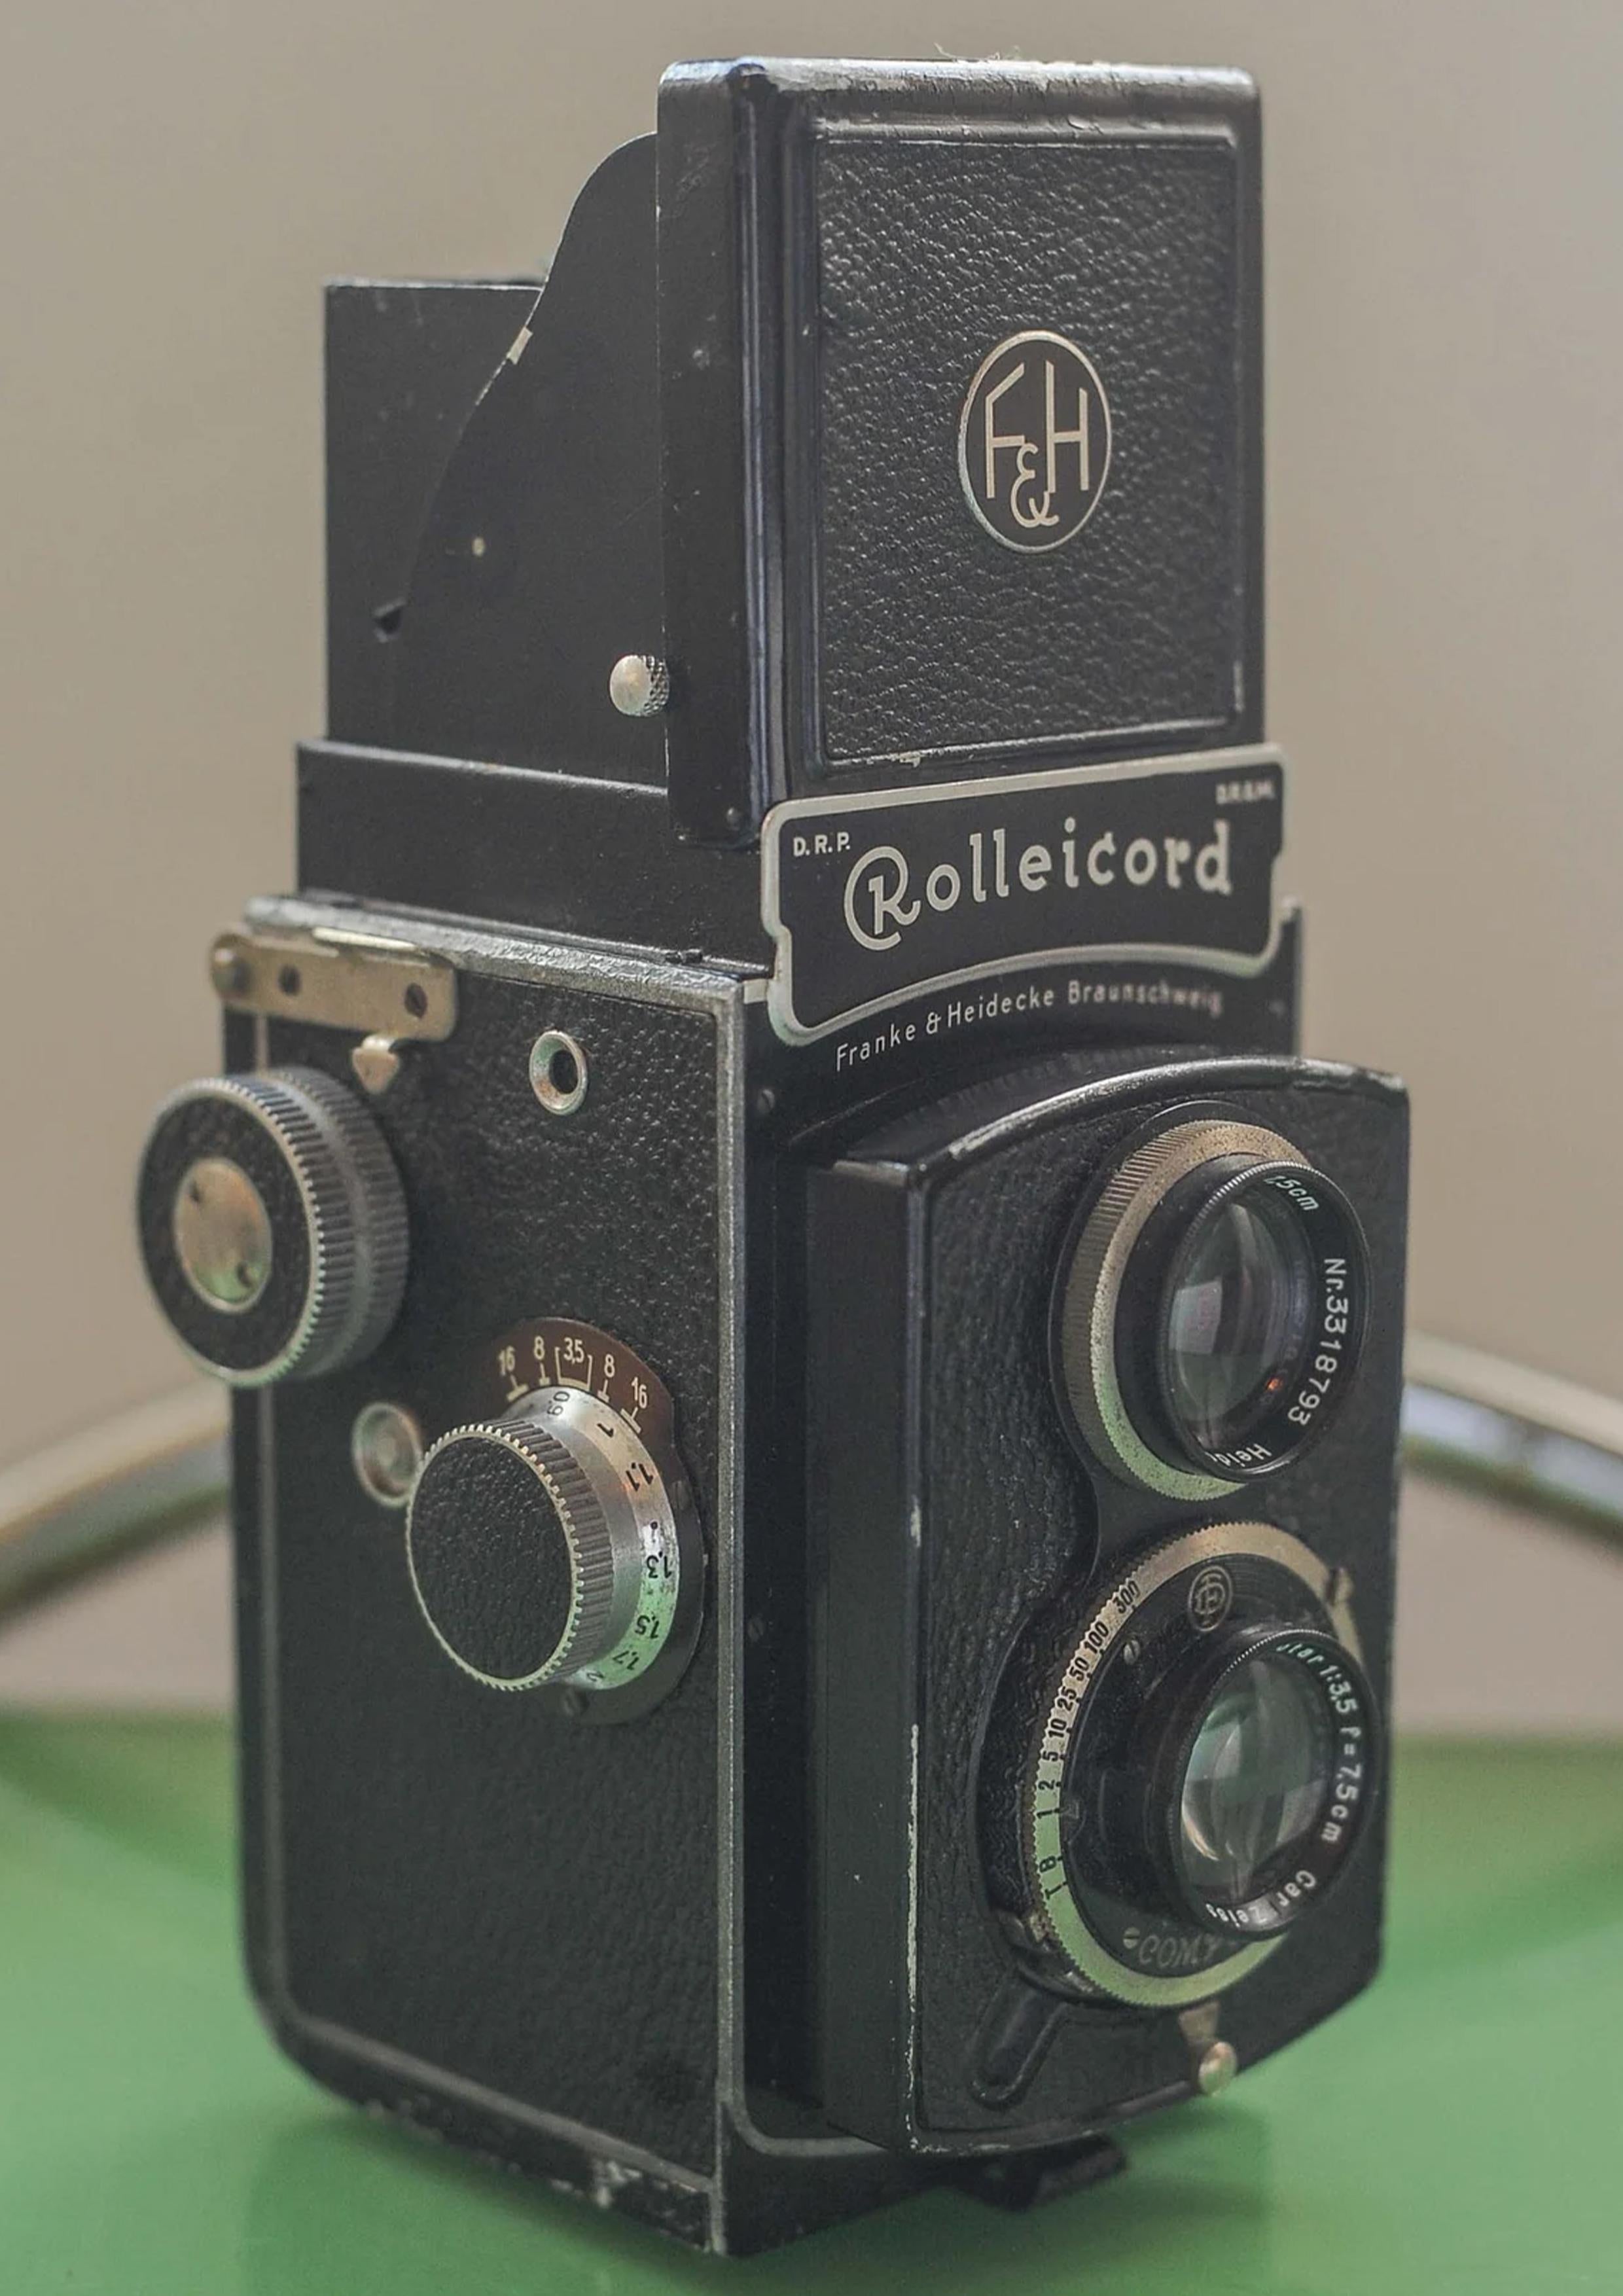 Franke & Heidecke Rolleicord II 120 Roll Film Twin Lens Reflex Camera & Case

Made In Germany, launched March 1936.

